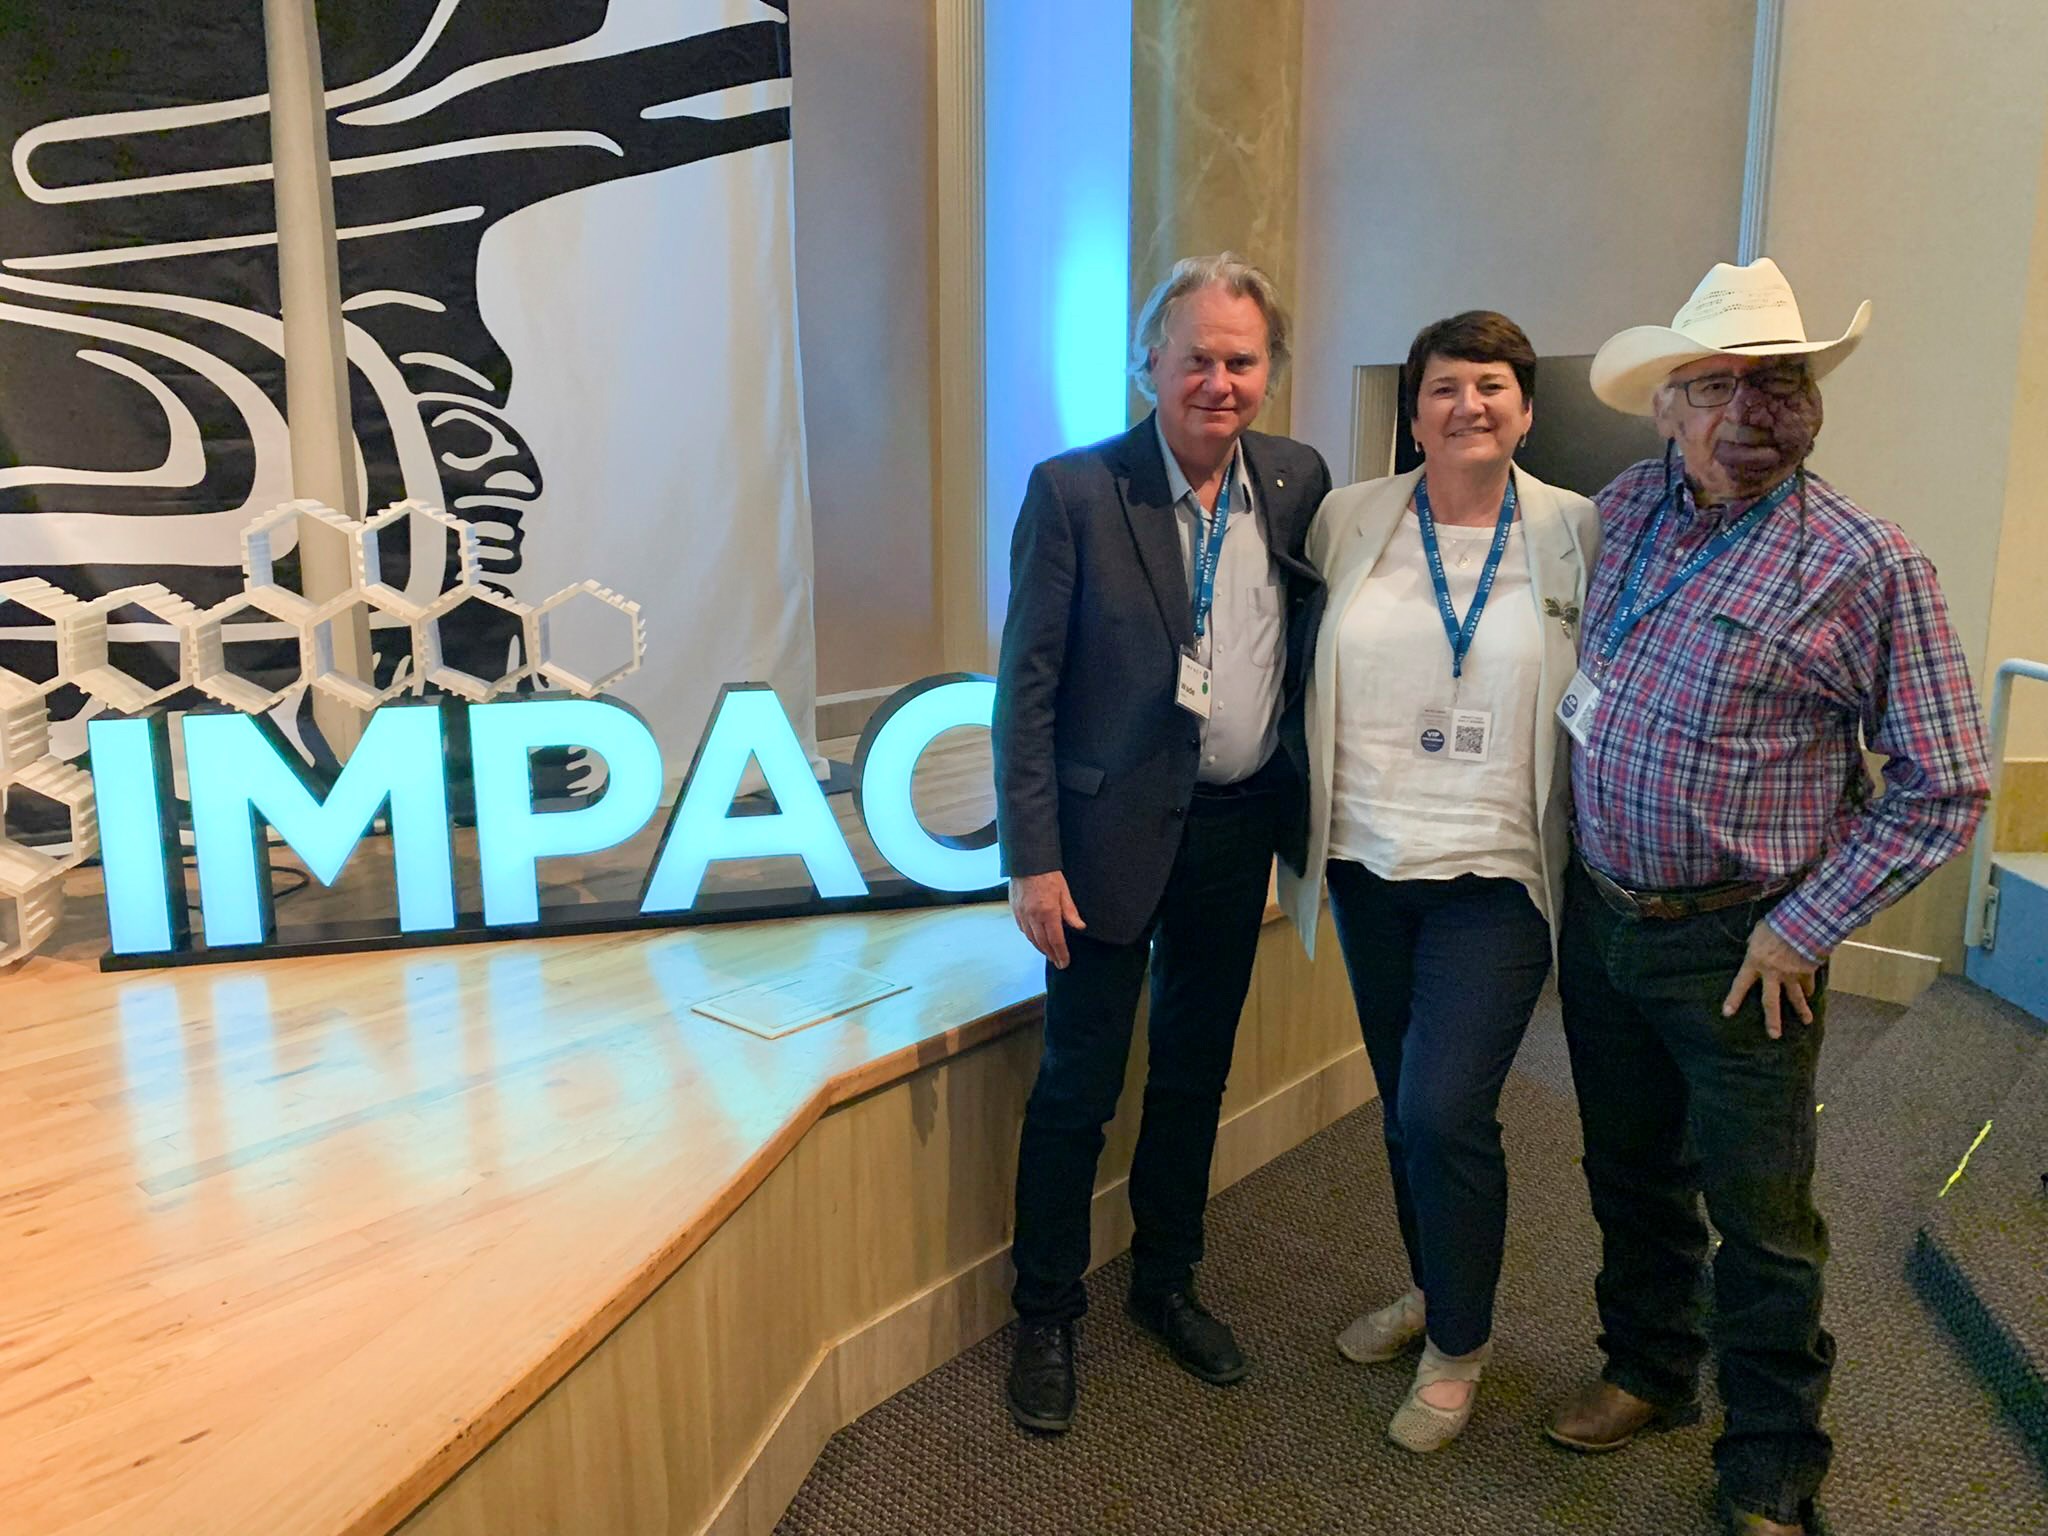 Monday, May 9, 2022 – Senator Karen Sorensen attends the IMPACT Sustainability Travel and Tourism Conference in Victoria, British Columbia, along with National Geographic Explorer-in-Residence Wade Davis (left) and Blood Tribe Elder Mike Bruised Head (Ninna Piiksii). The senator was pleased to participate in discussions about positive and sustainable growth of tourism in Canada.